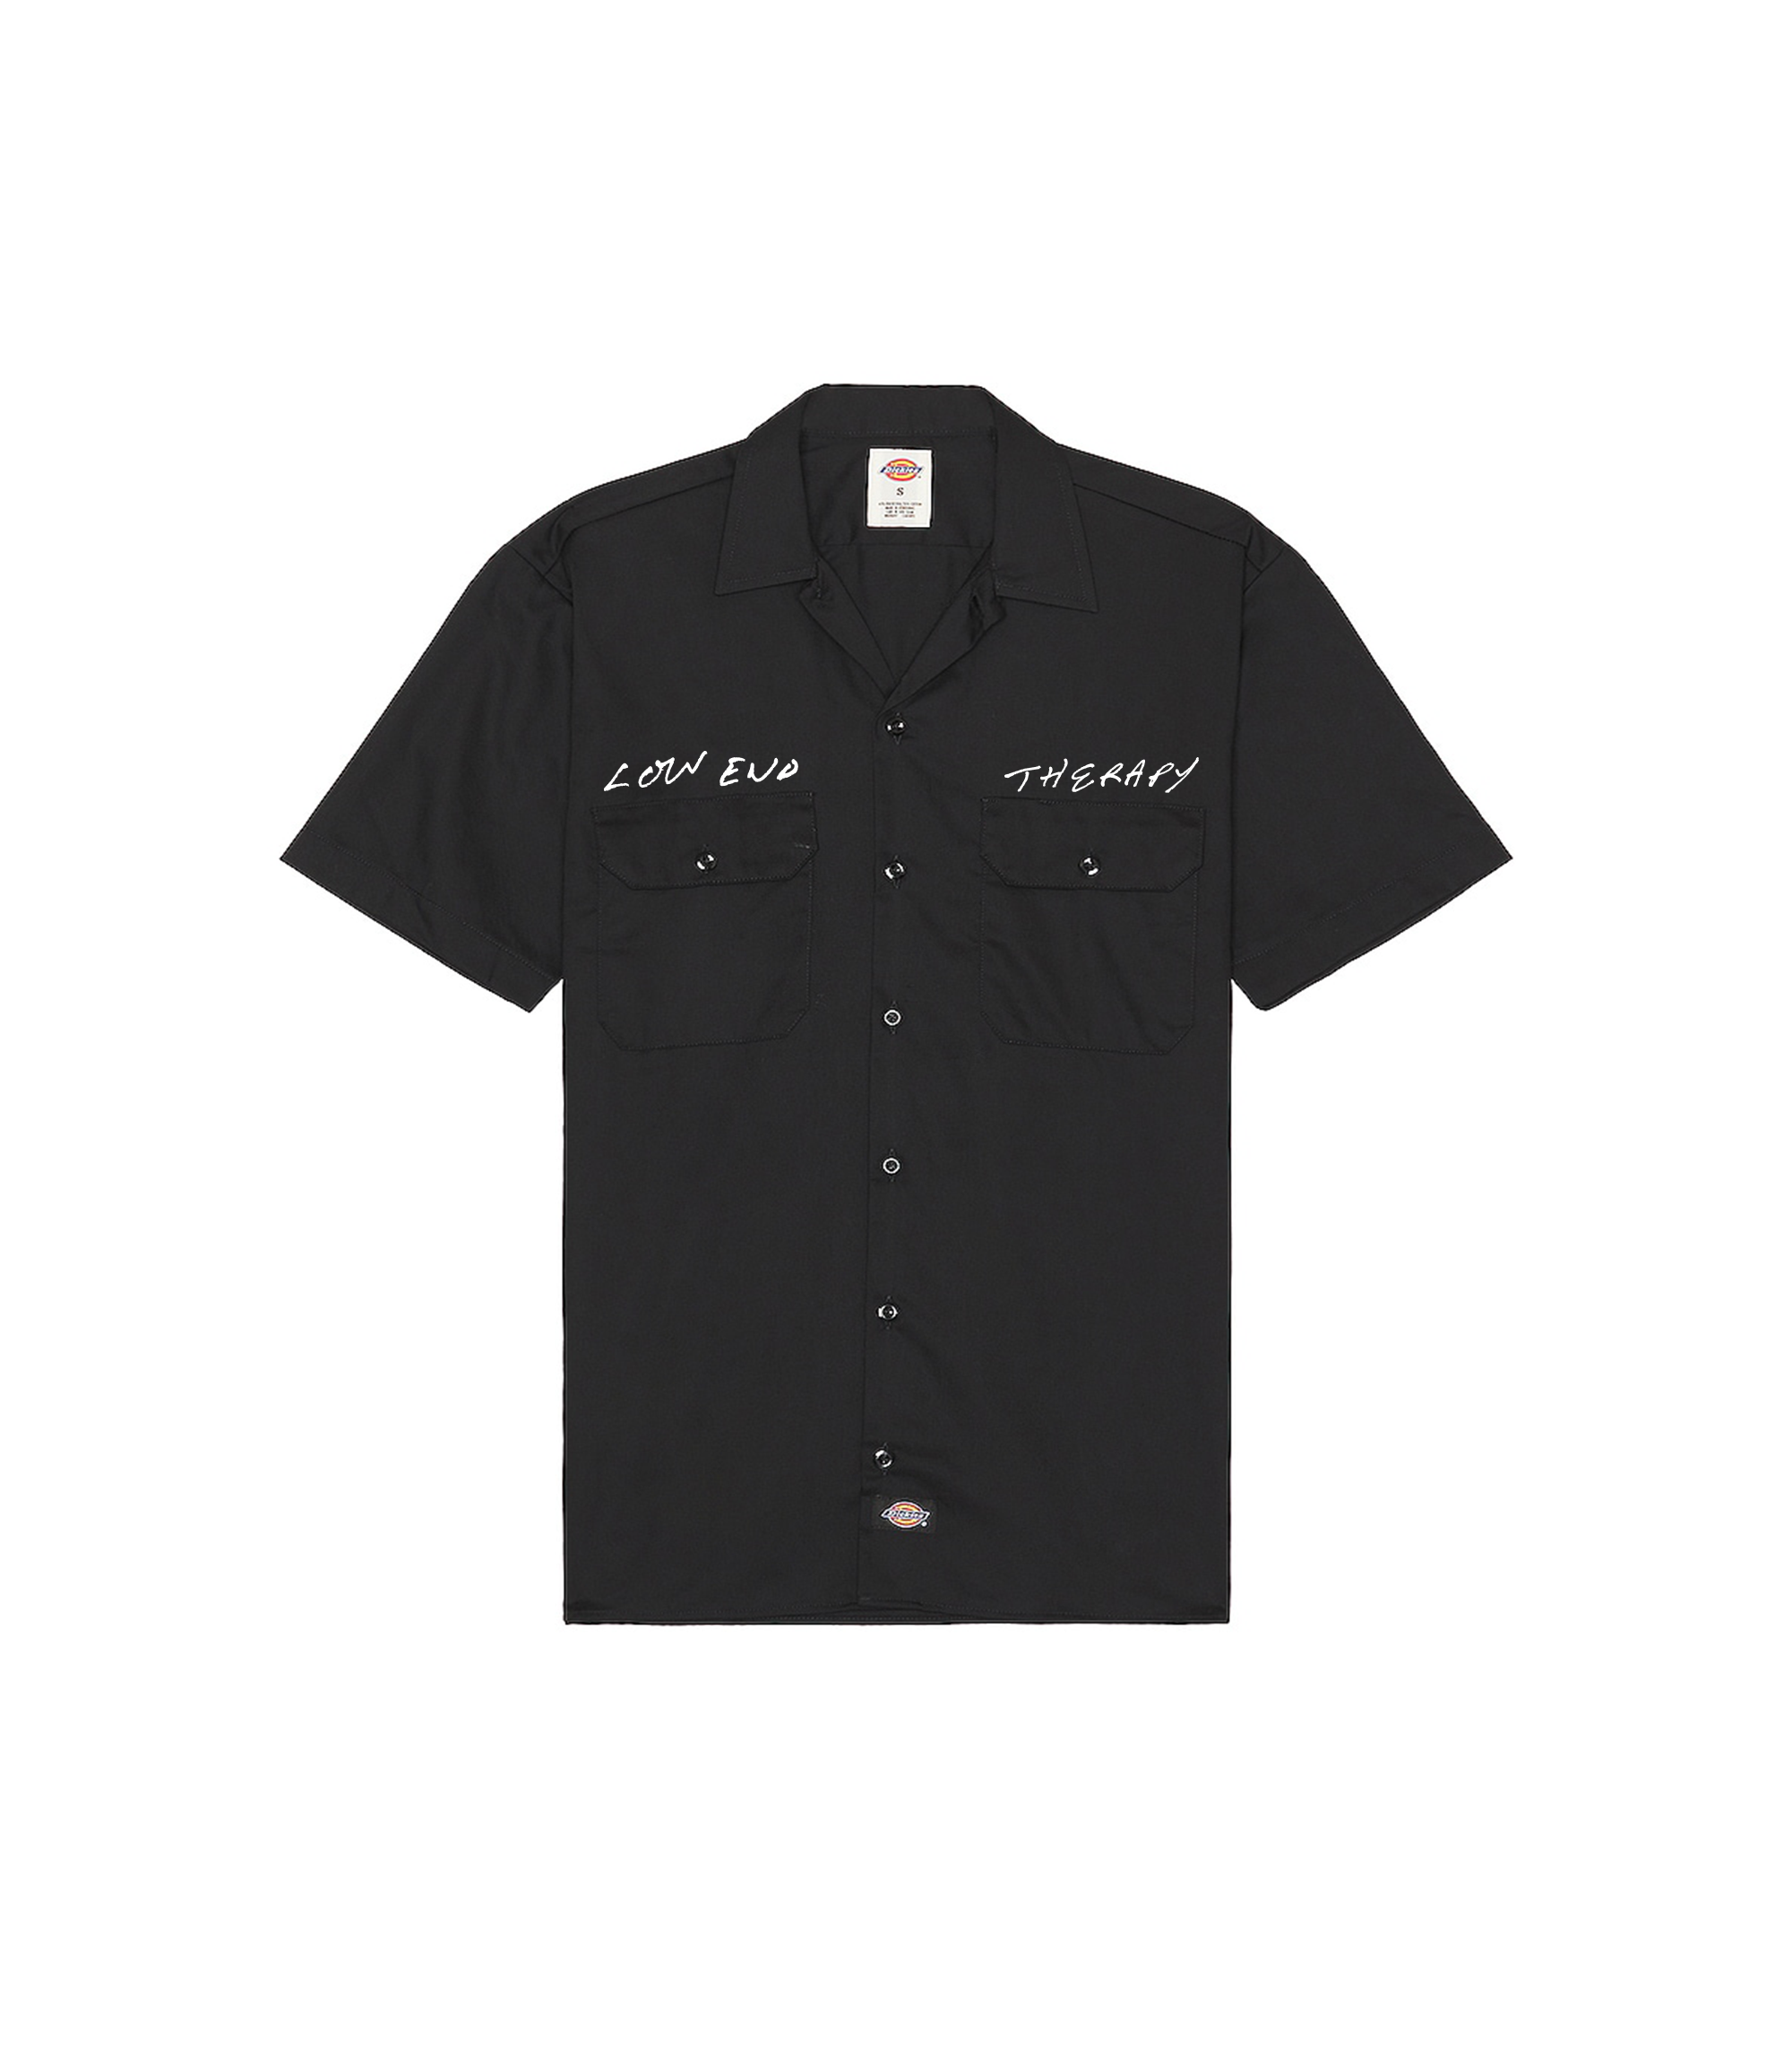 Therapy "Reloved" Dickies Work Shirt - Black